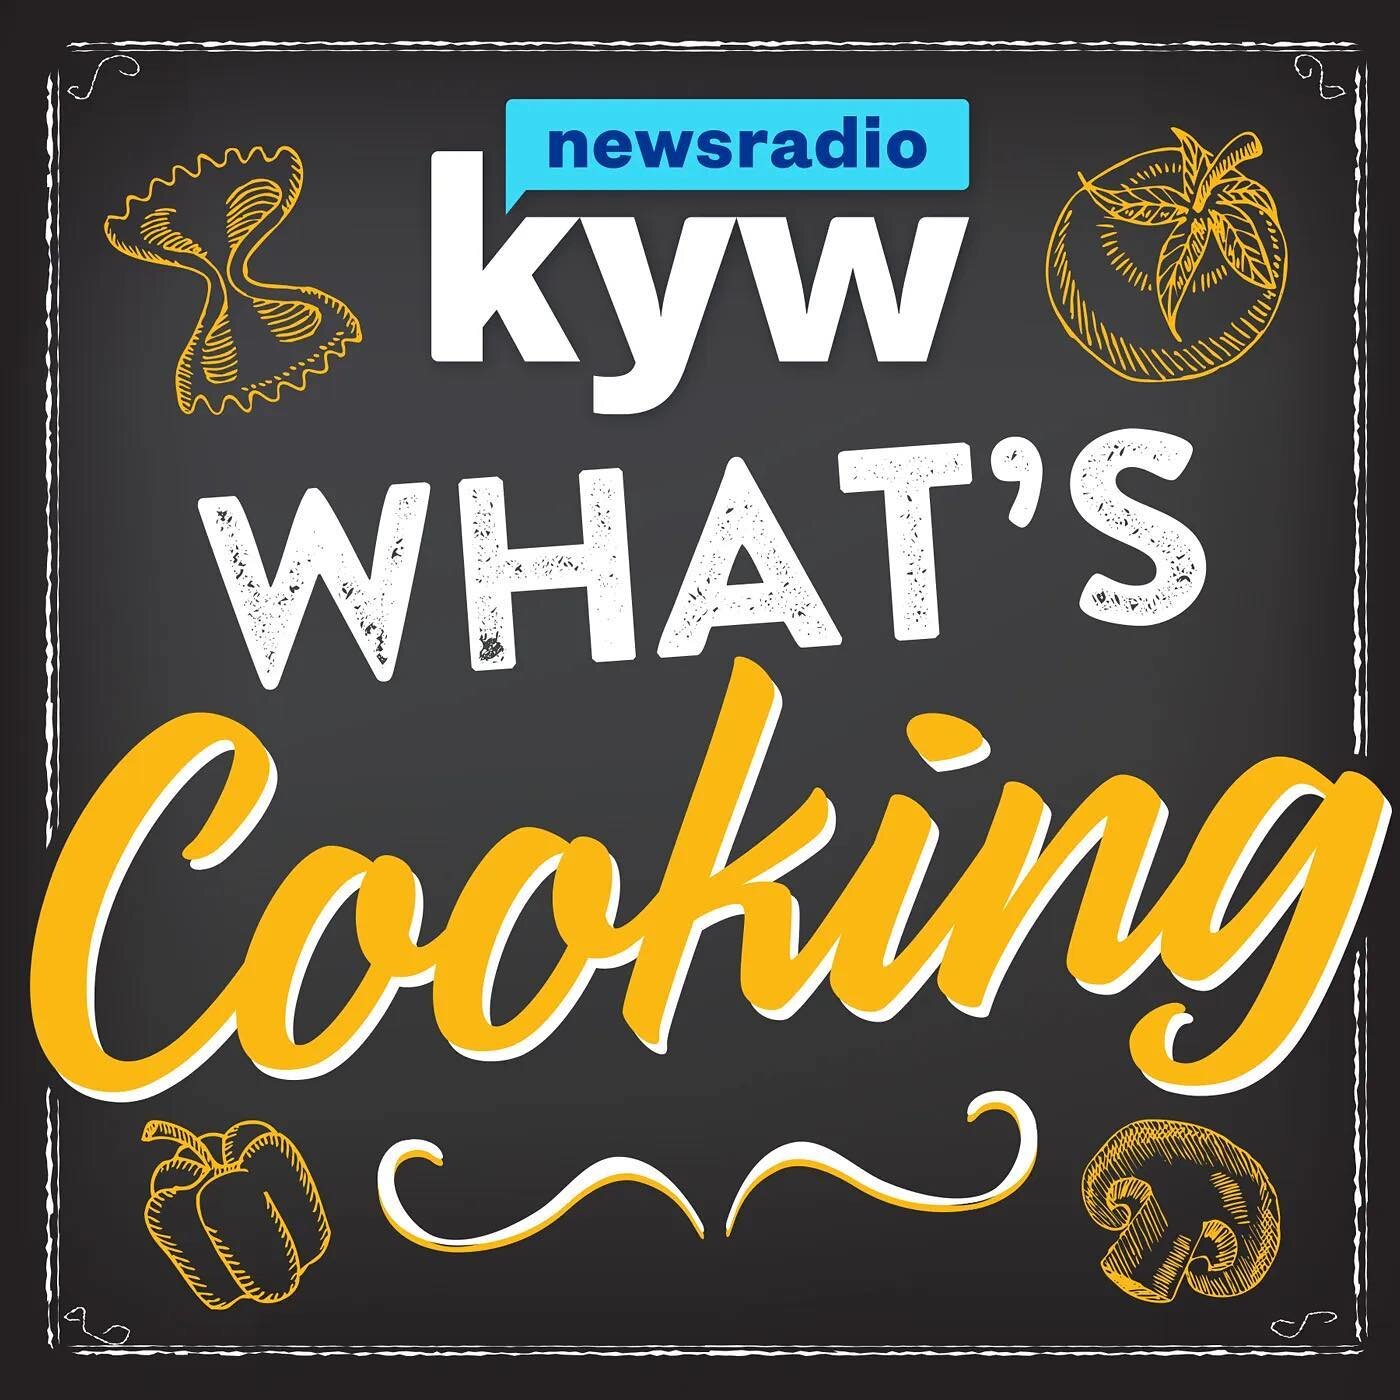 Last week I talked with Hadas Kuznits of @kywnewsradio about making the transition from catering to producing sauces during Covid-19. Click the link in our bio to hear the full interview!❤️❤️❤️
.
.
#kywnewsradio #vestabbq #interview #catering #sauce 